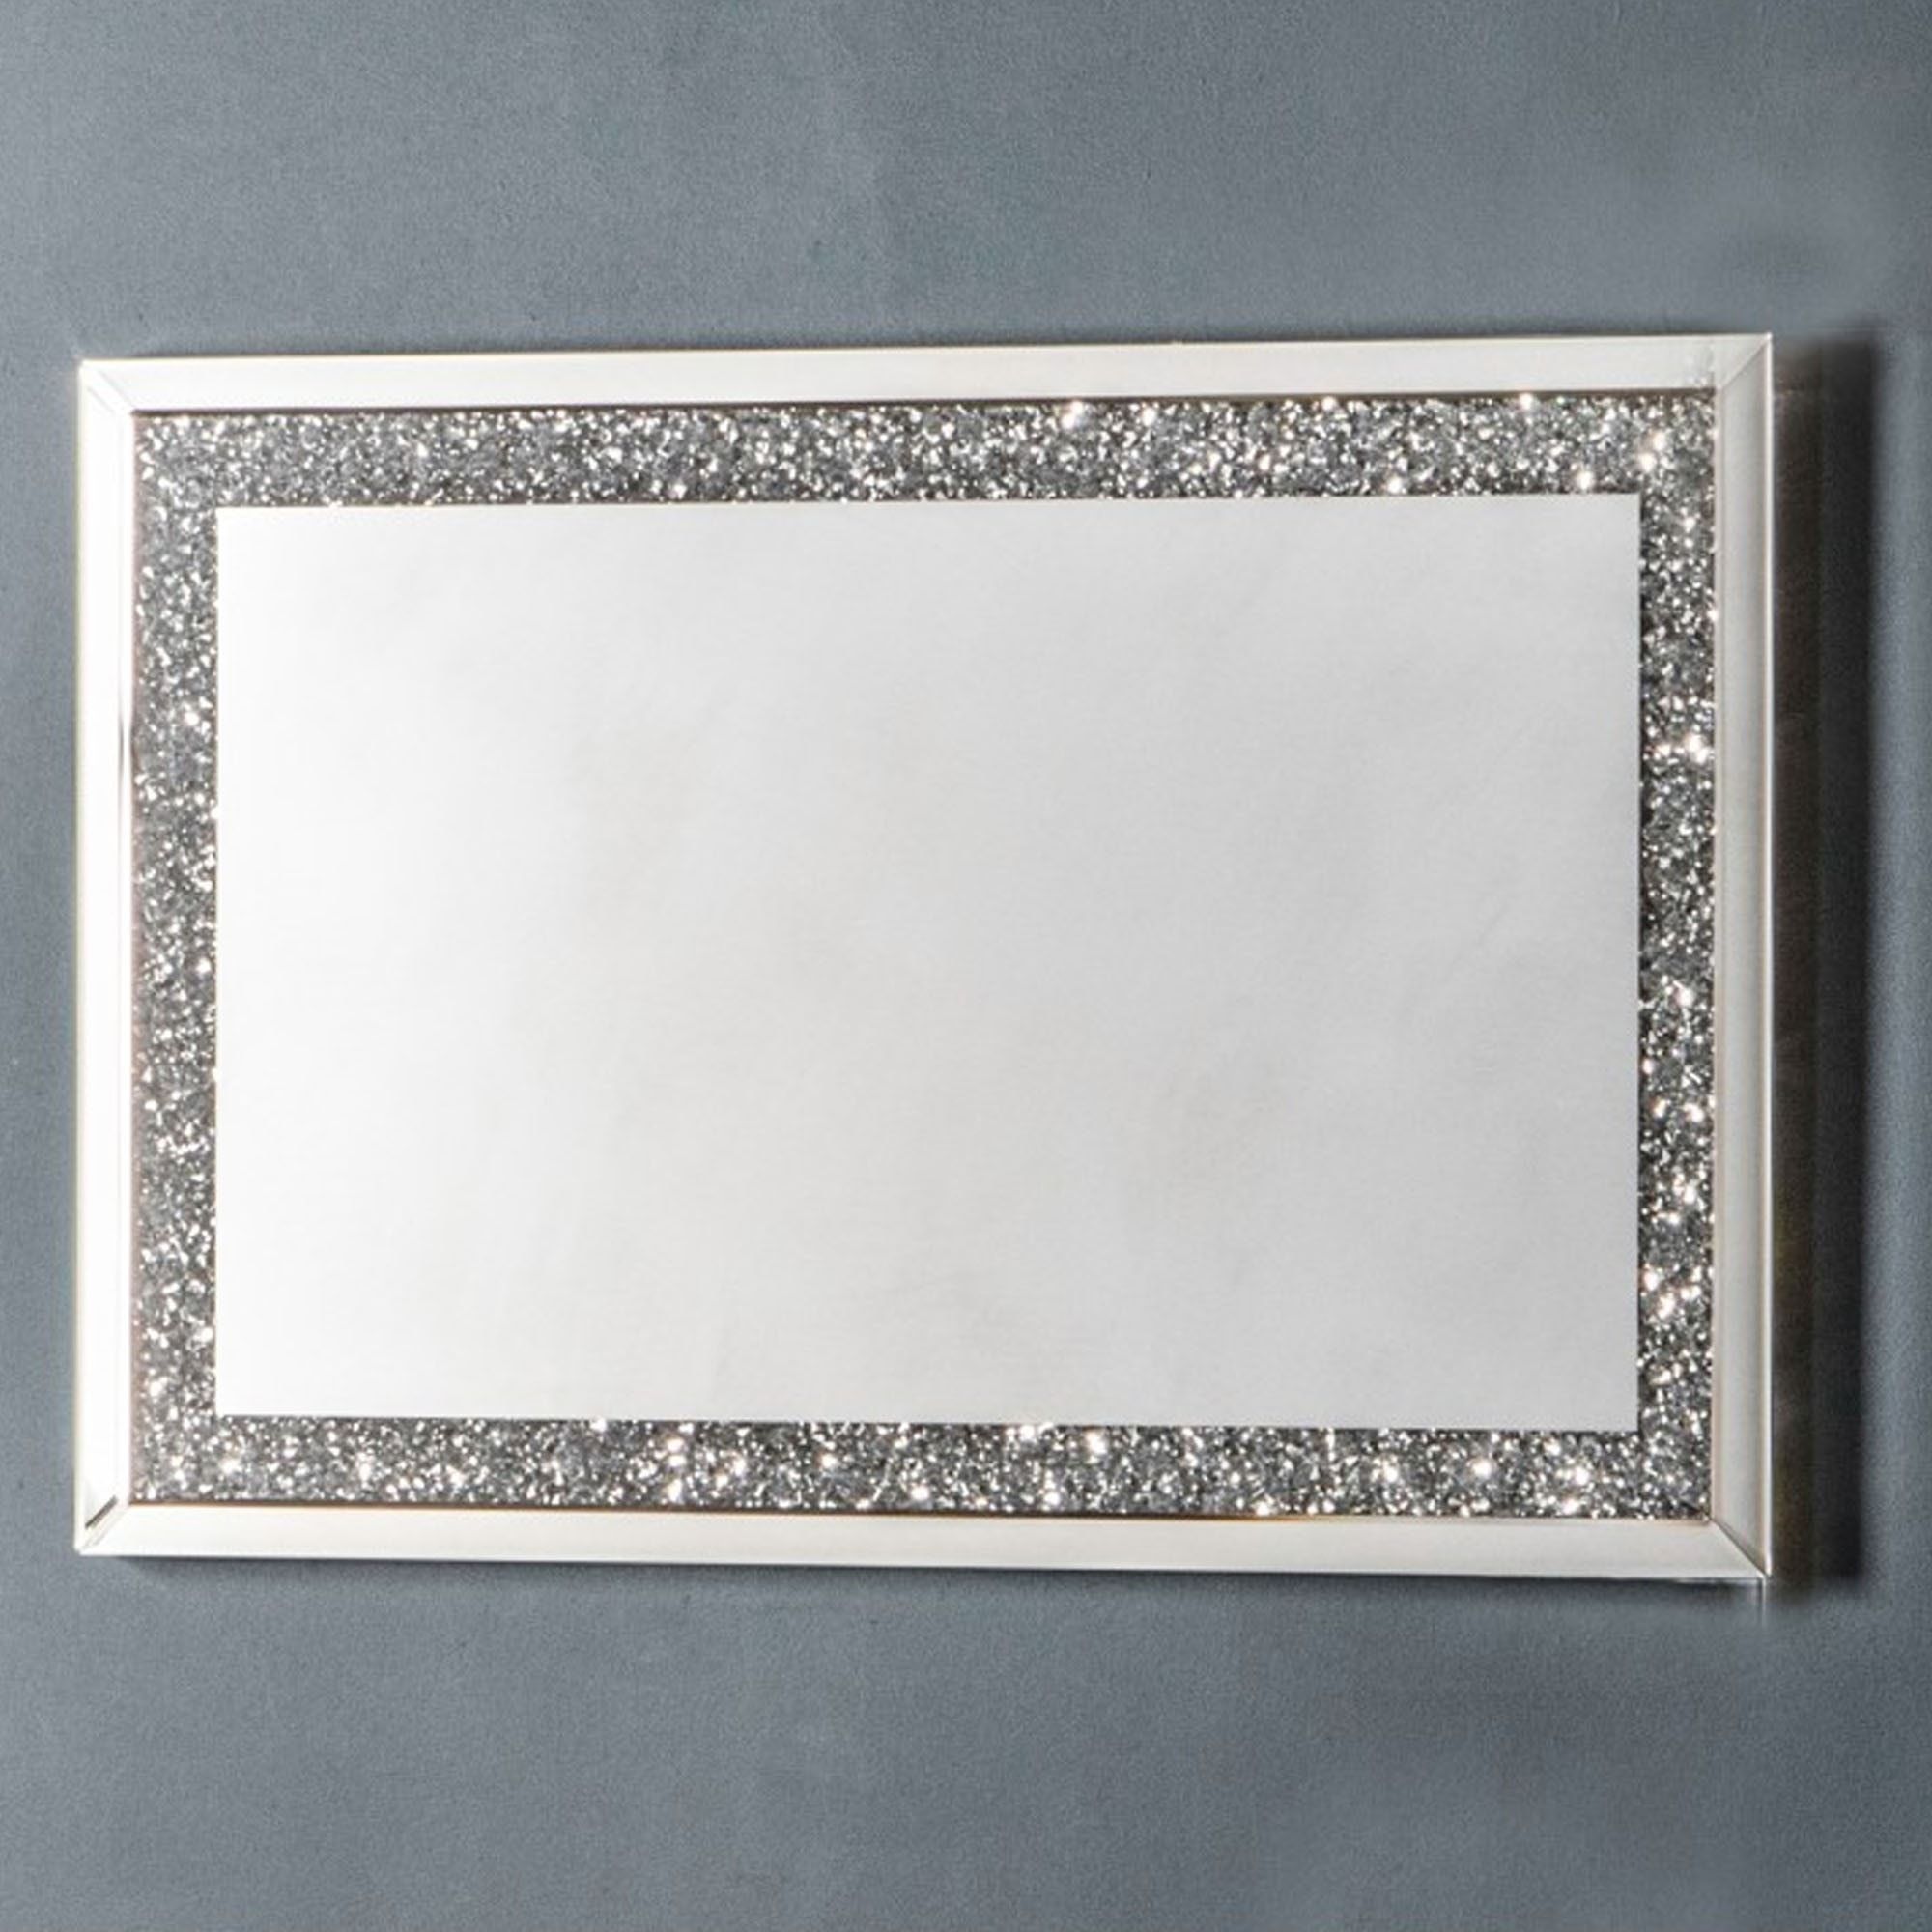 Westmoore Silver Mirror | Diamond Mirror | Crushed Glass Mirror Inside Silver Metal Cut Edge Wall Mirrors (View 8 of 15)